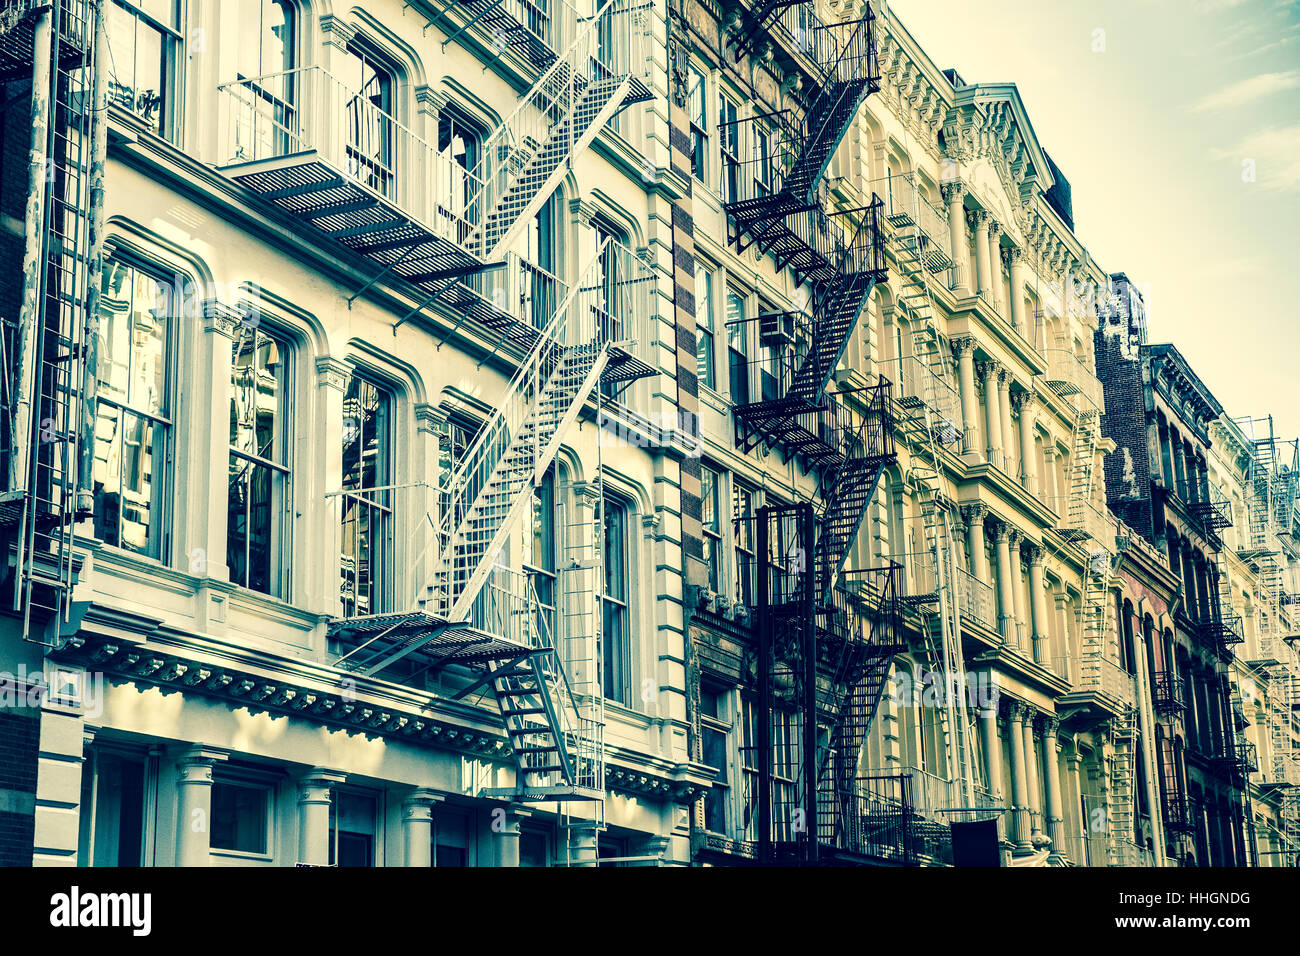 New York City view of exterior facade on ornate old apartment building residence with fire escapes seen from lower Manhattan, NY Stock Photo